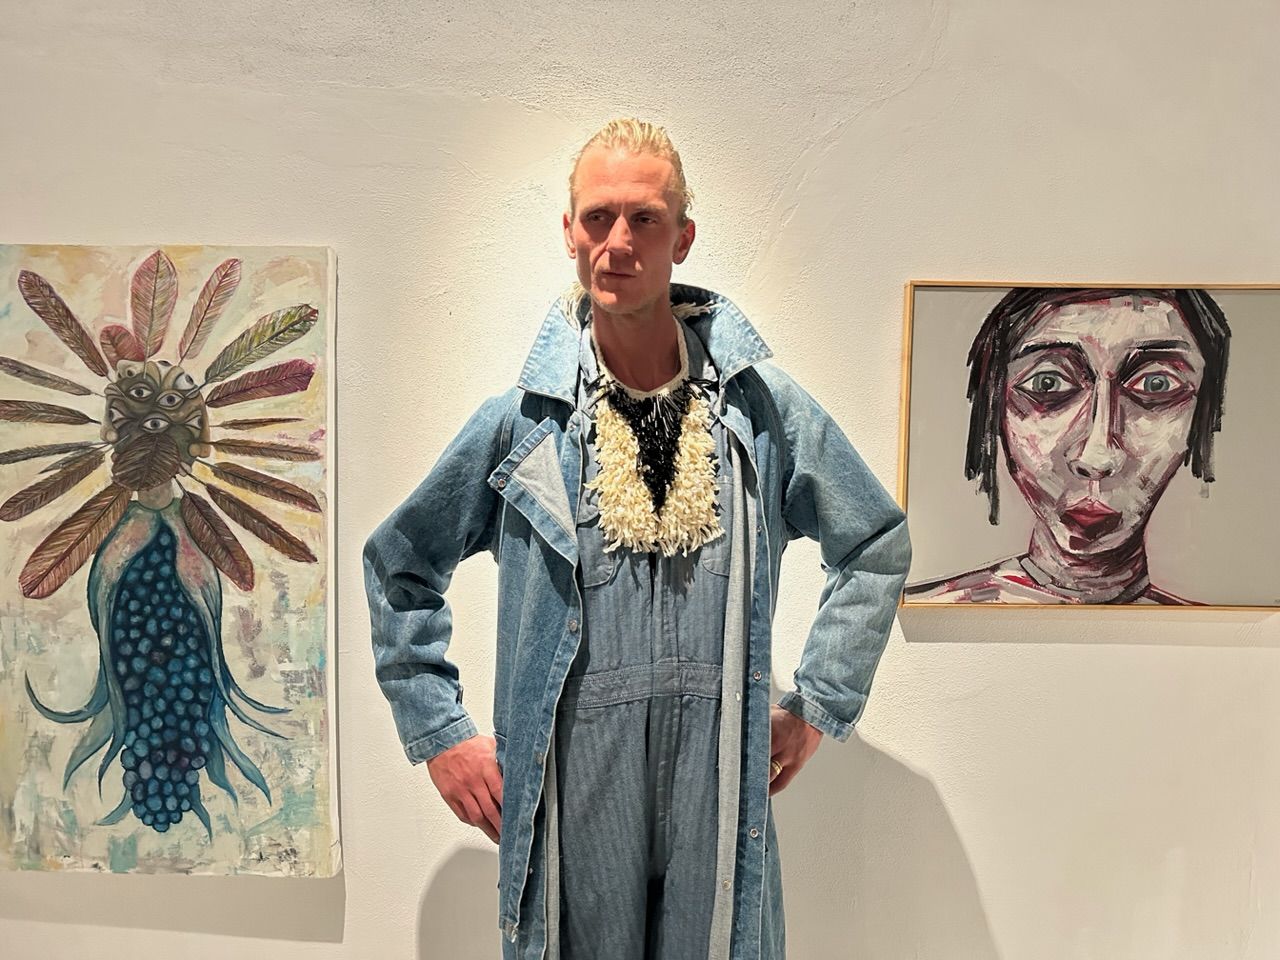 A tall thin man wearing a light denim outfit and a sculptural mother of pearl and black coral necklace stands against a gallery wall with two oil paintings on each side